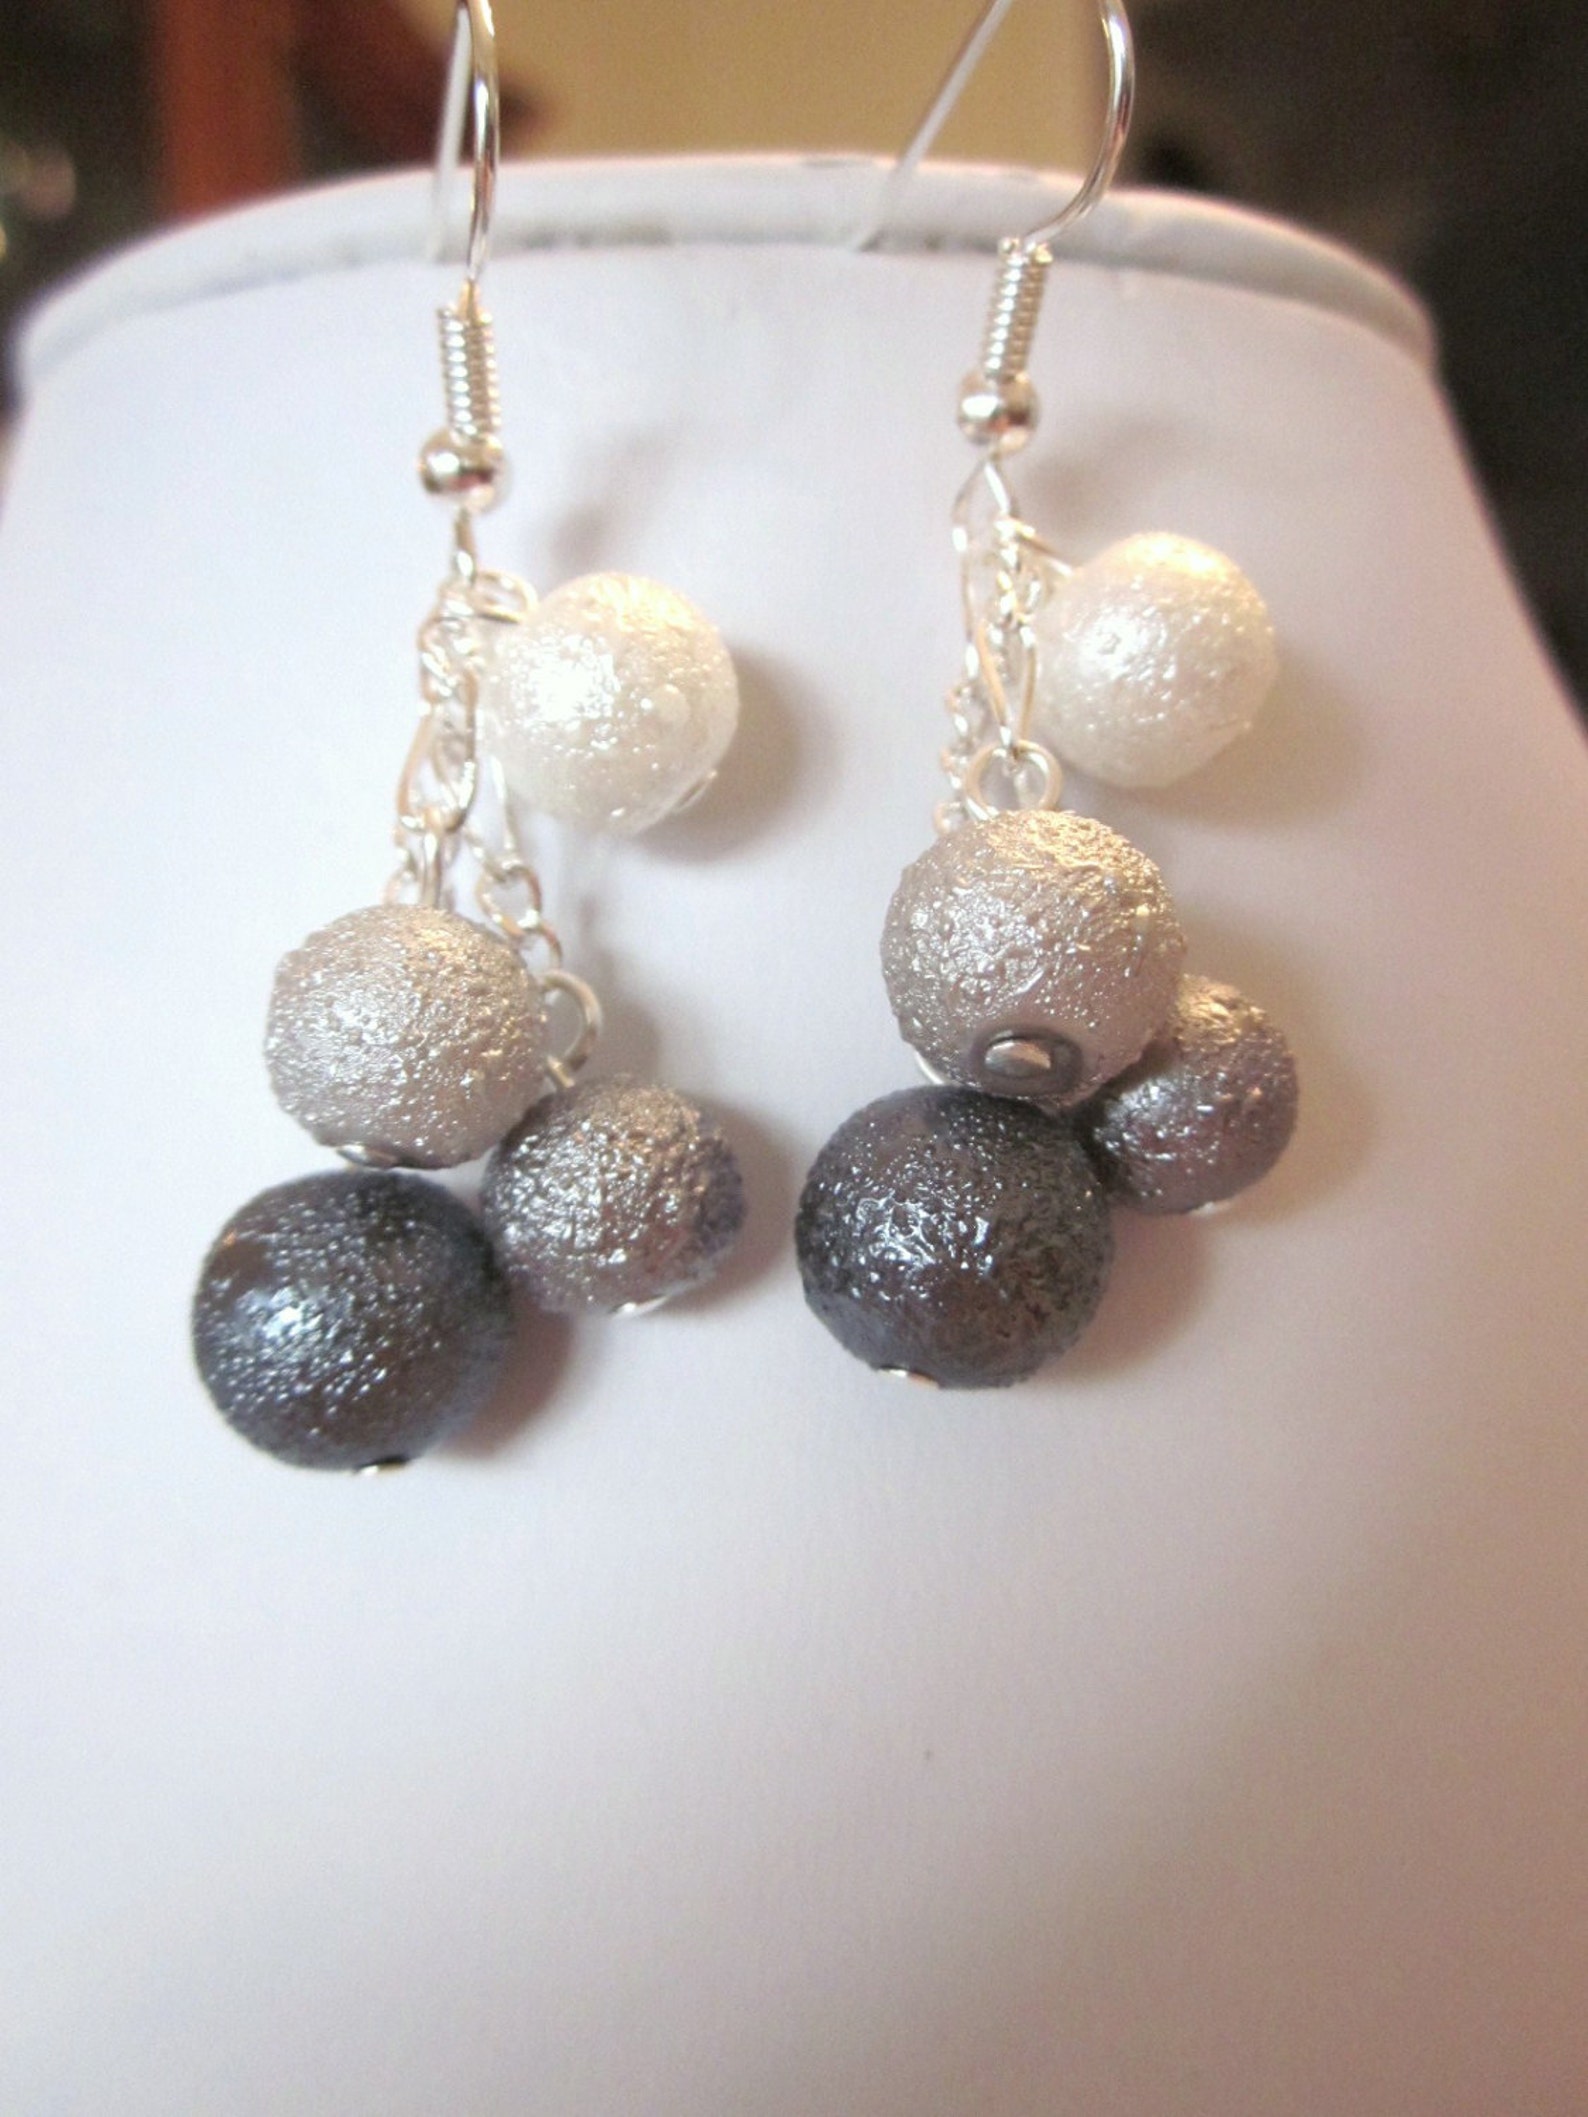 Bumpy Pearl Necklace Stunning shades of Grey - Etsy